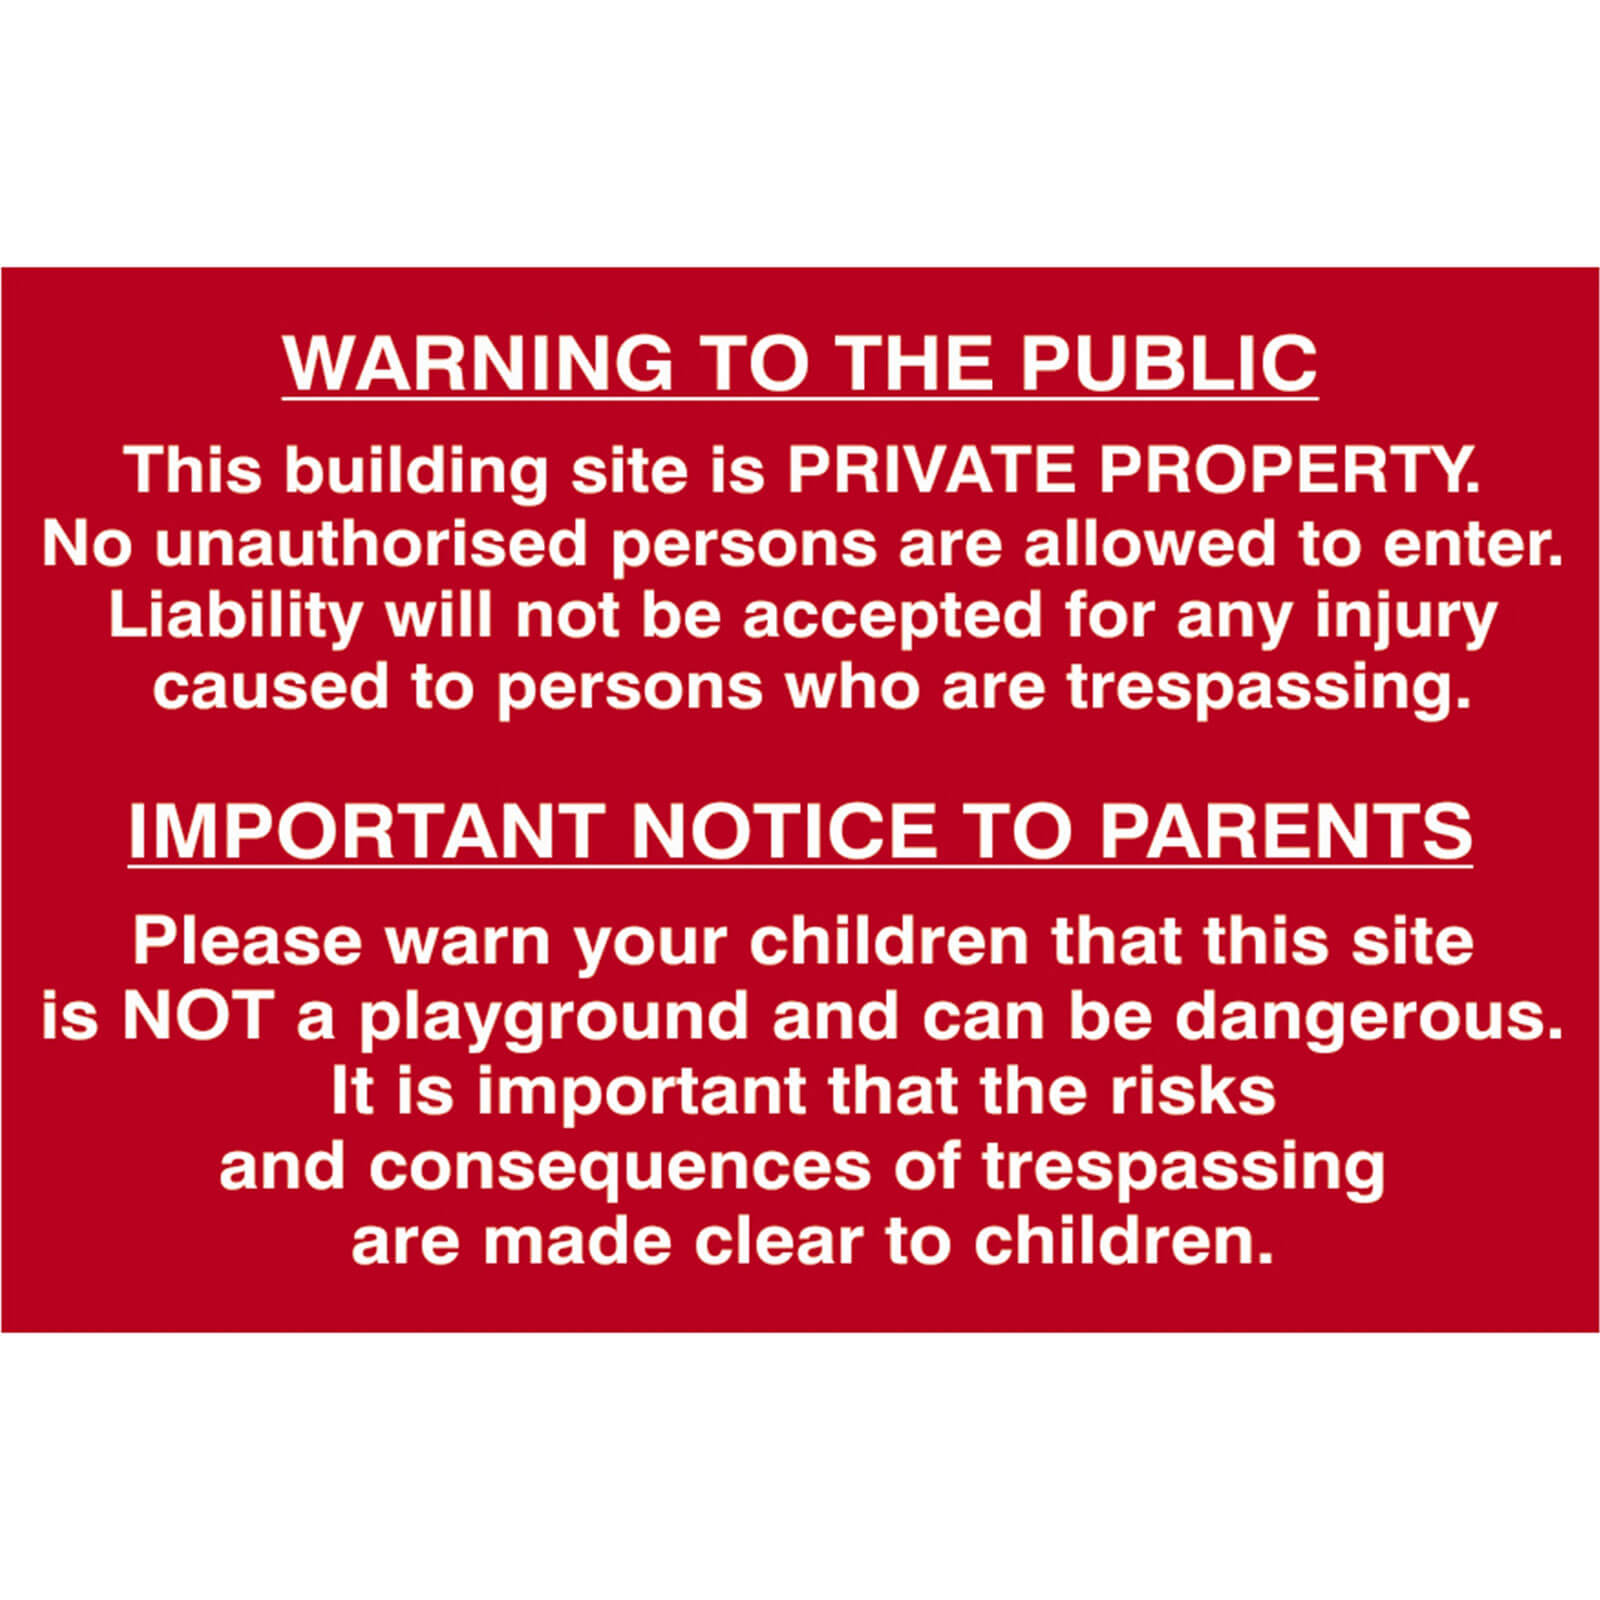 Scan 600 x 400mm PVC Sign - Building Site Warning To Public And Parents